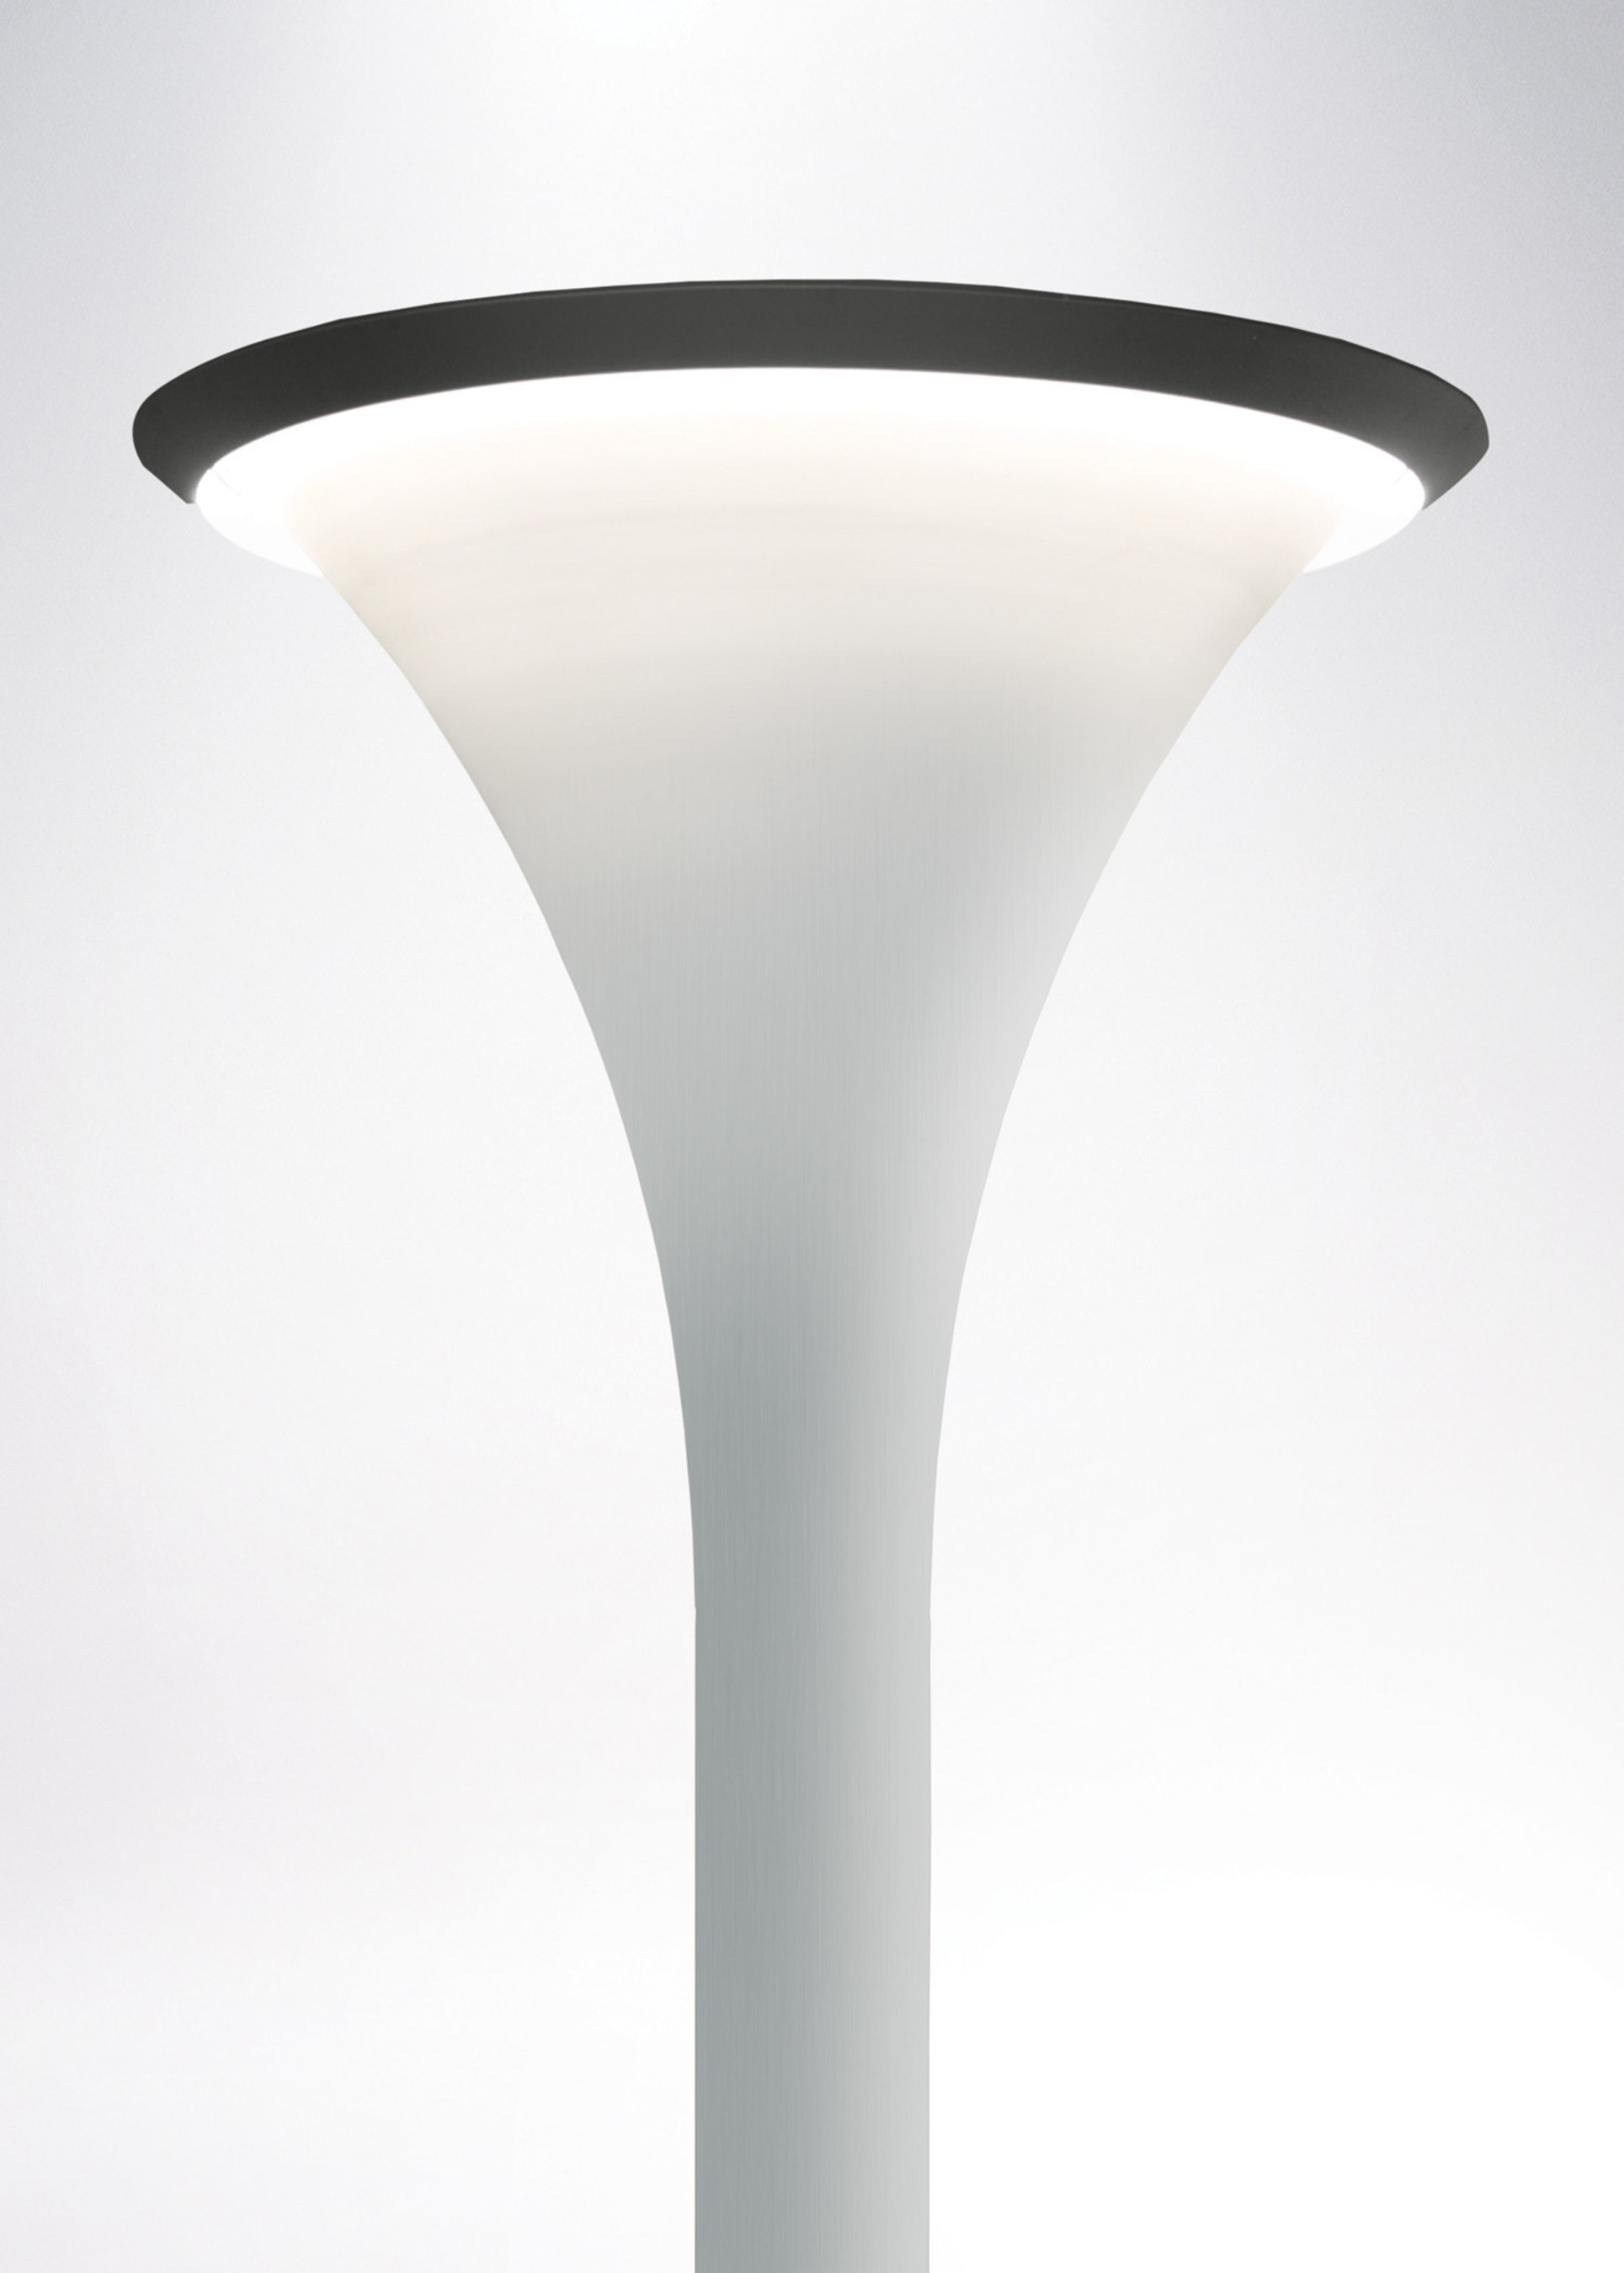 The new Amerlux Lunetta is an innovative and impressive pedestrian scale exterior luminaire family that self-illuminates a curved funnel shaped top head, as well as the pole, creating a seamless, glare-free light post of varying heights. The beauty of Lunetta lies in its simplicity.